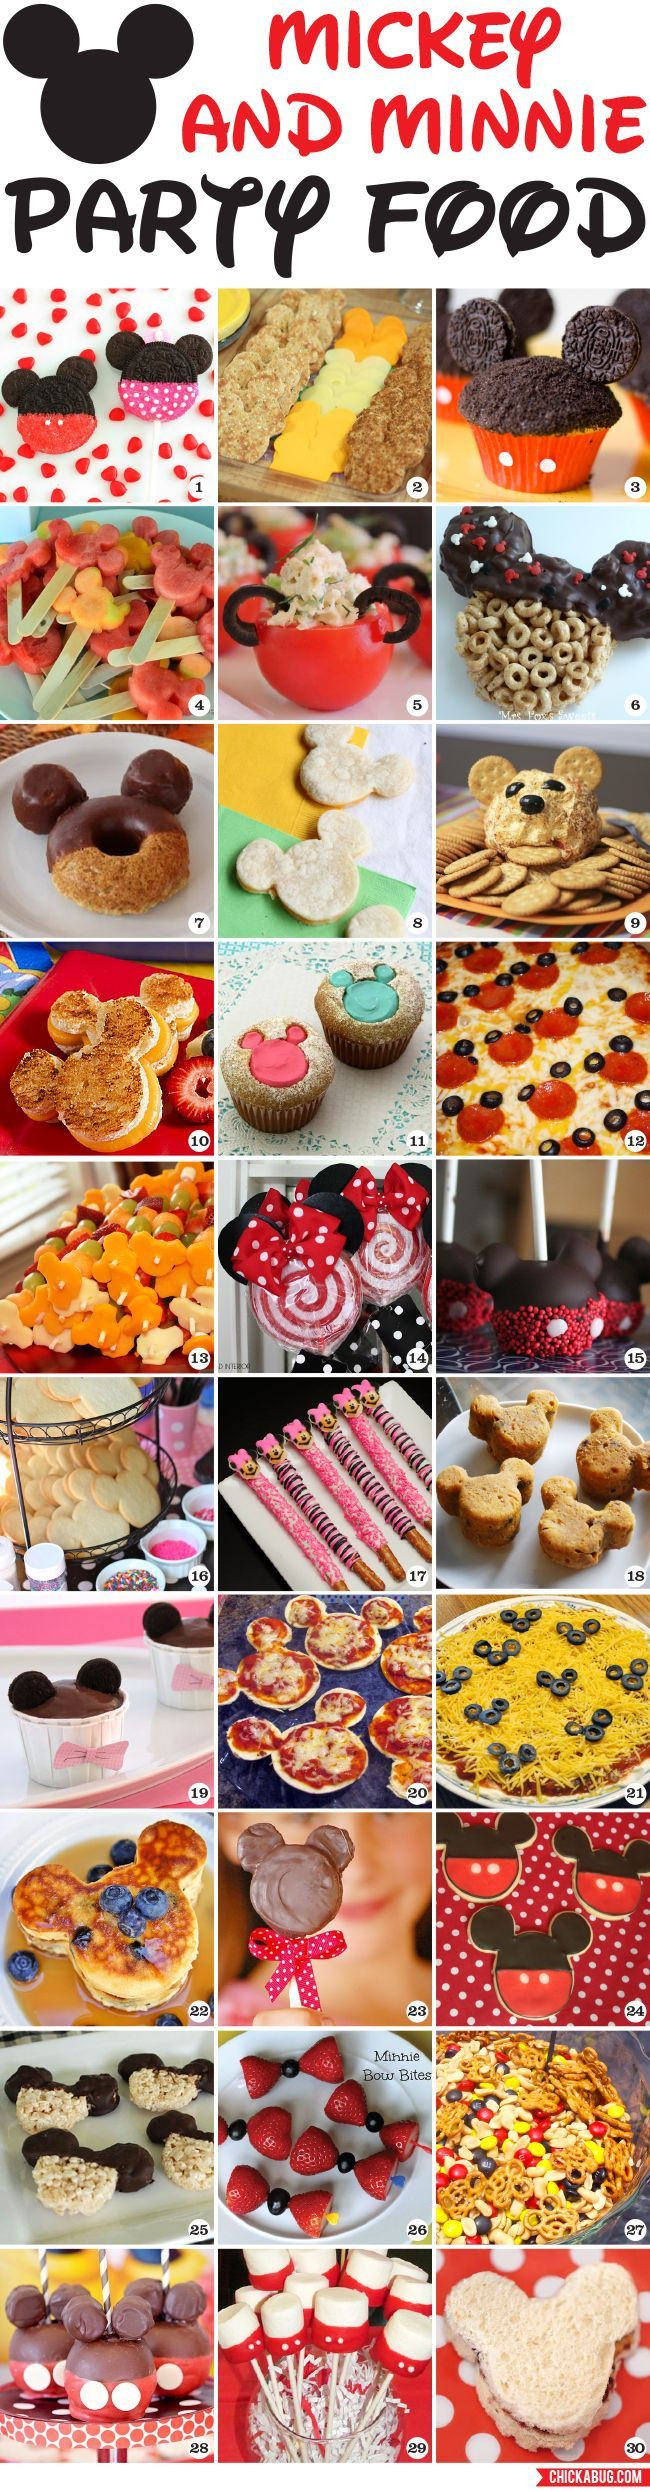 Mickey Mouse 1St Birthday Party Food Ideas
 30 awesome Mickey Mouse and Minnie Mouse party food ideas